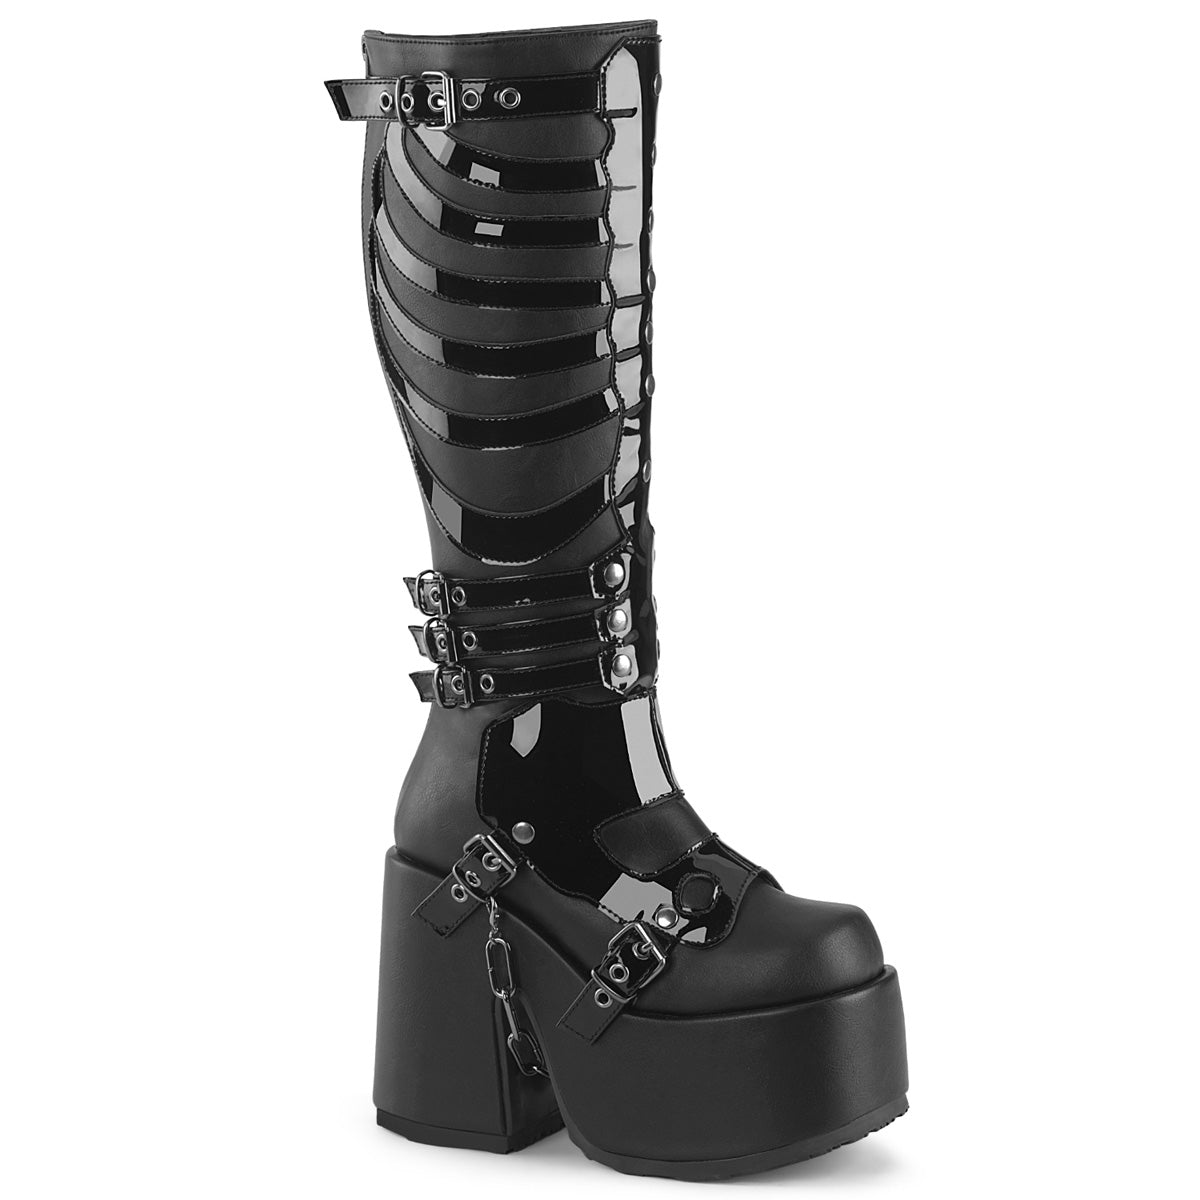 CAMEL-235 Ribcage Boots by Demonia